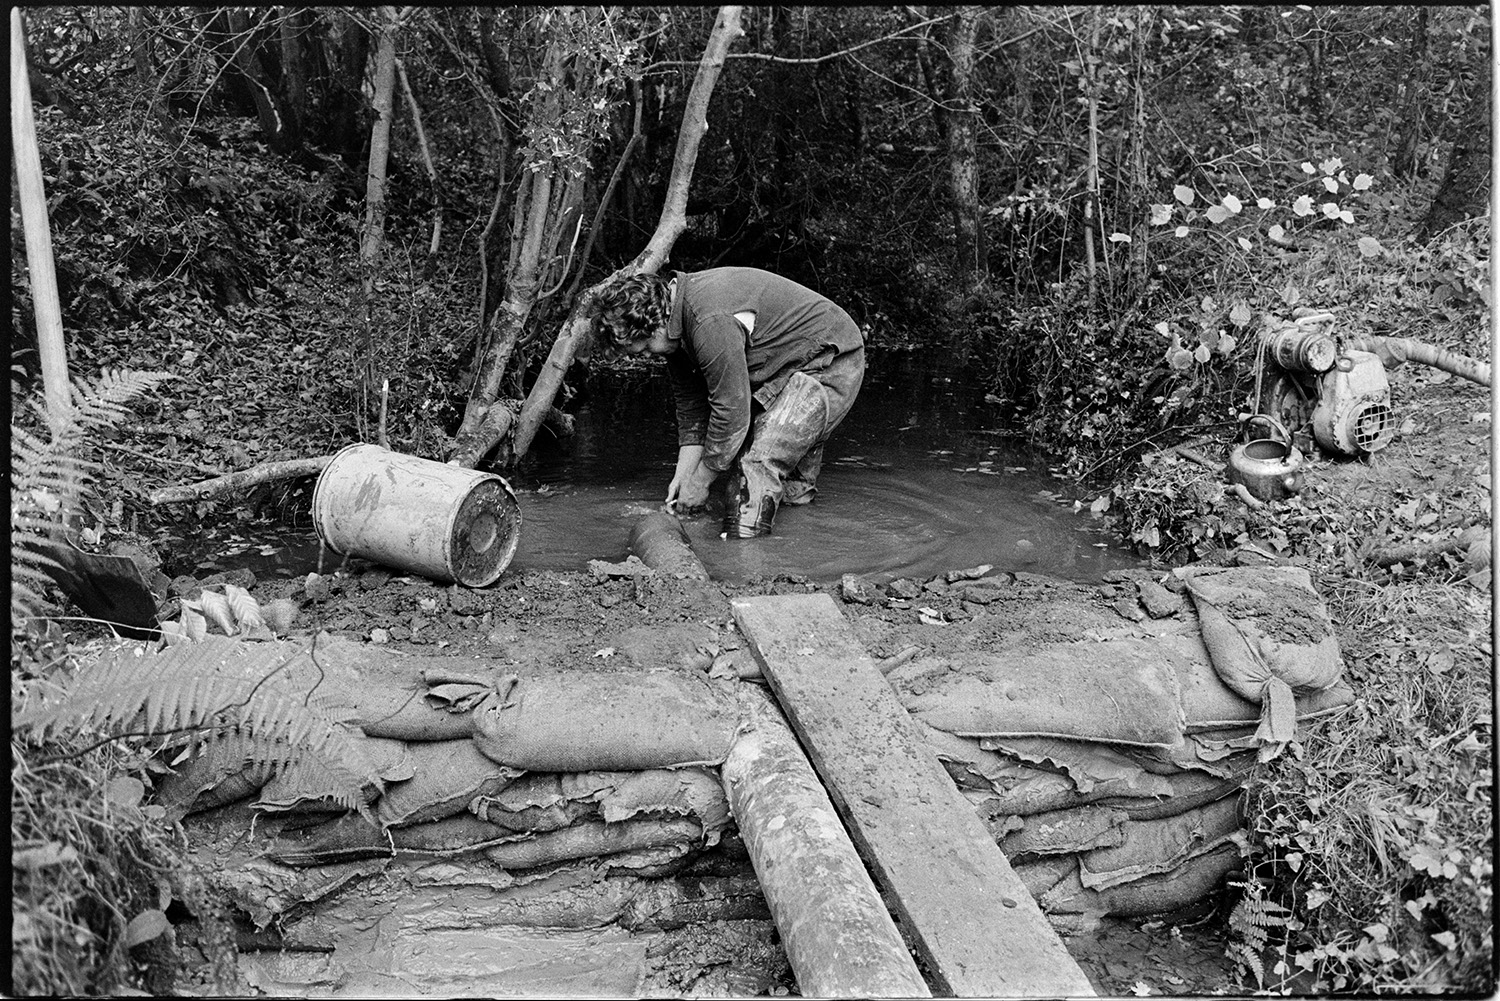 Men repairing bridge, crawling under road. 
[A man repairing a bridge at Addisford, Dolton. He is checking the pipe which is pumping water from the stream away from the bridge, behind a wall of sand bags.]